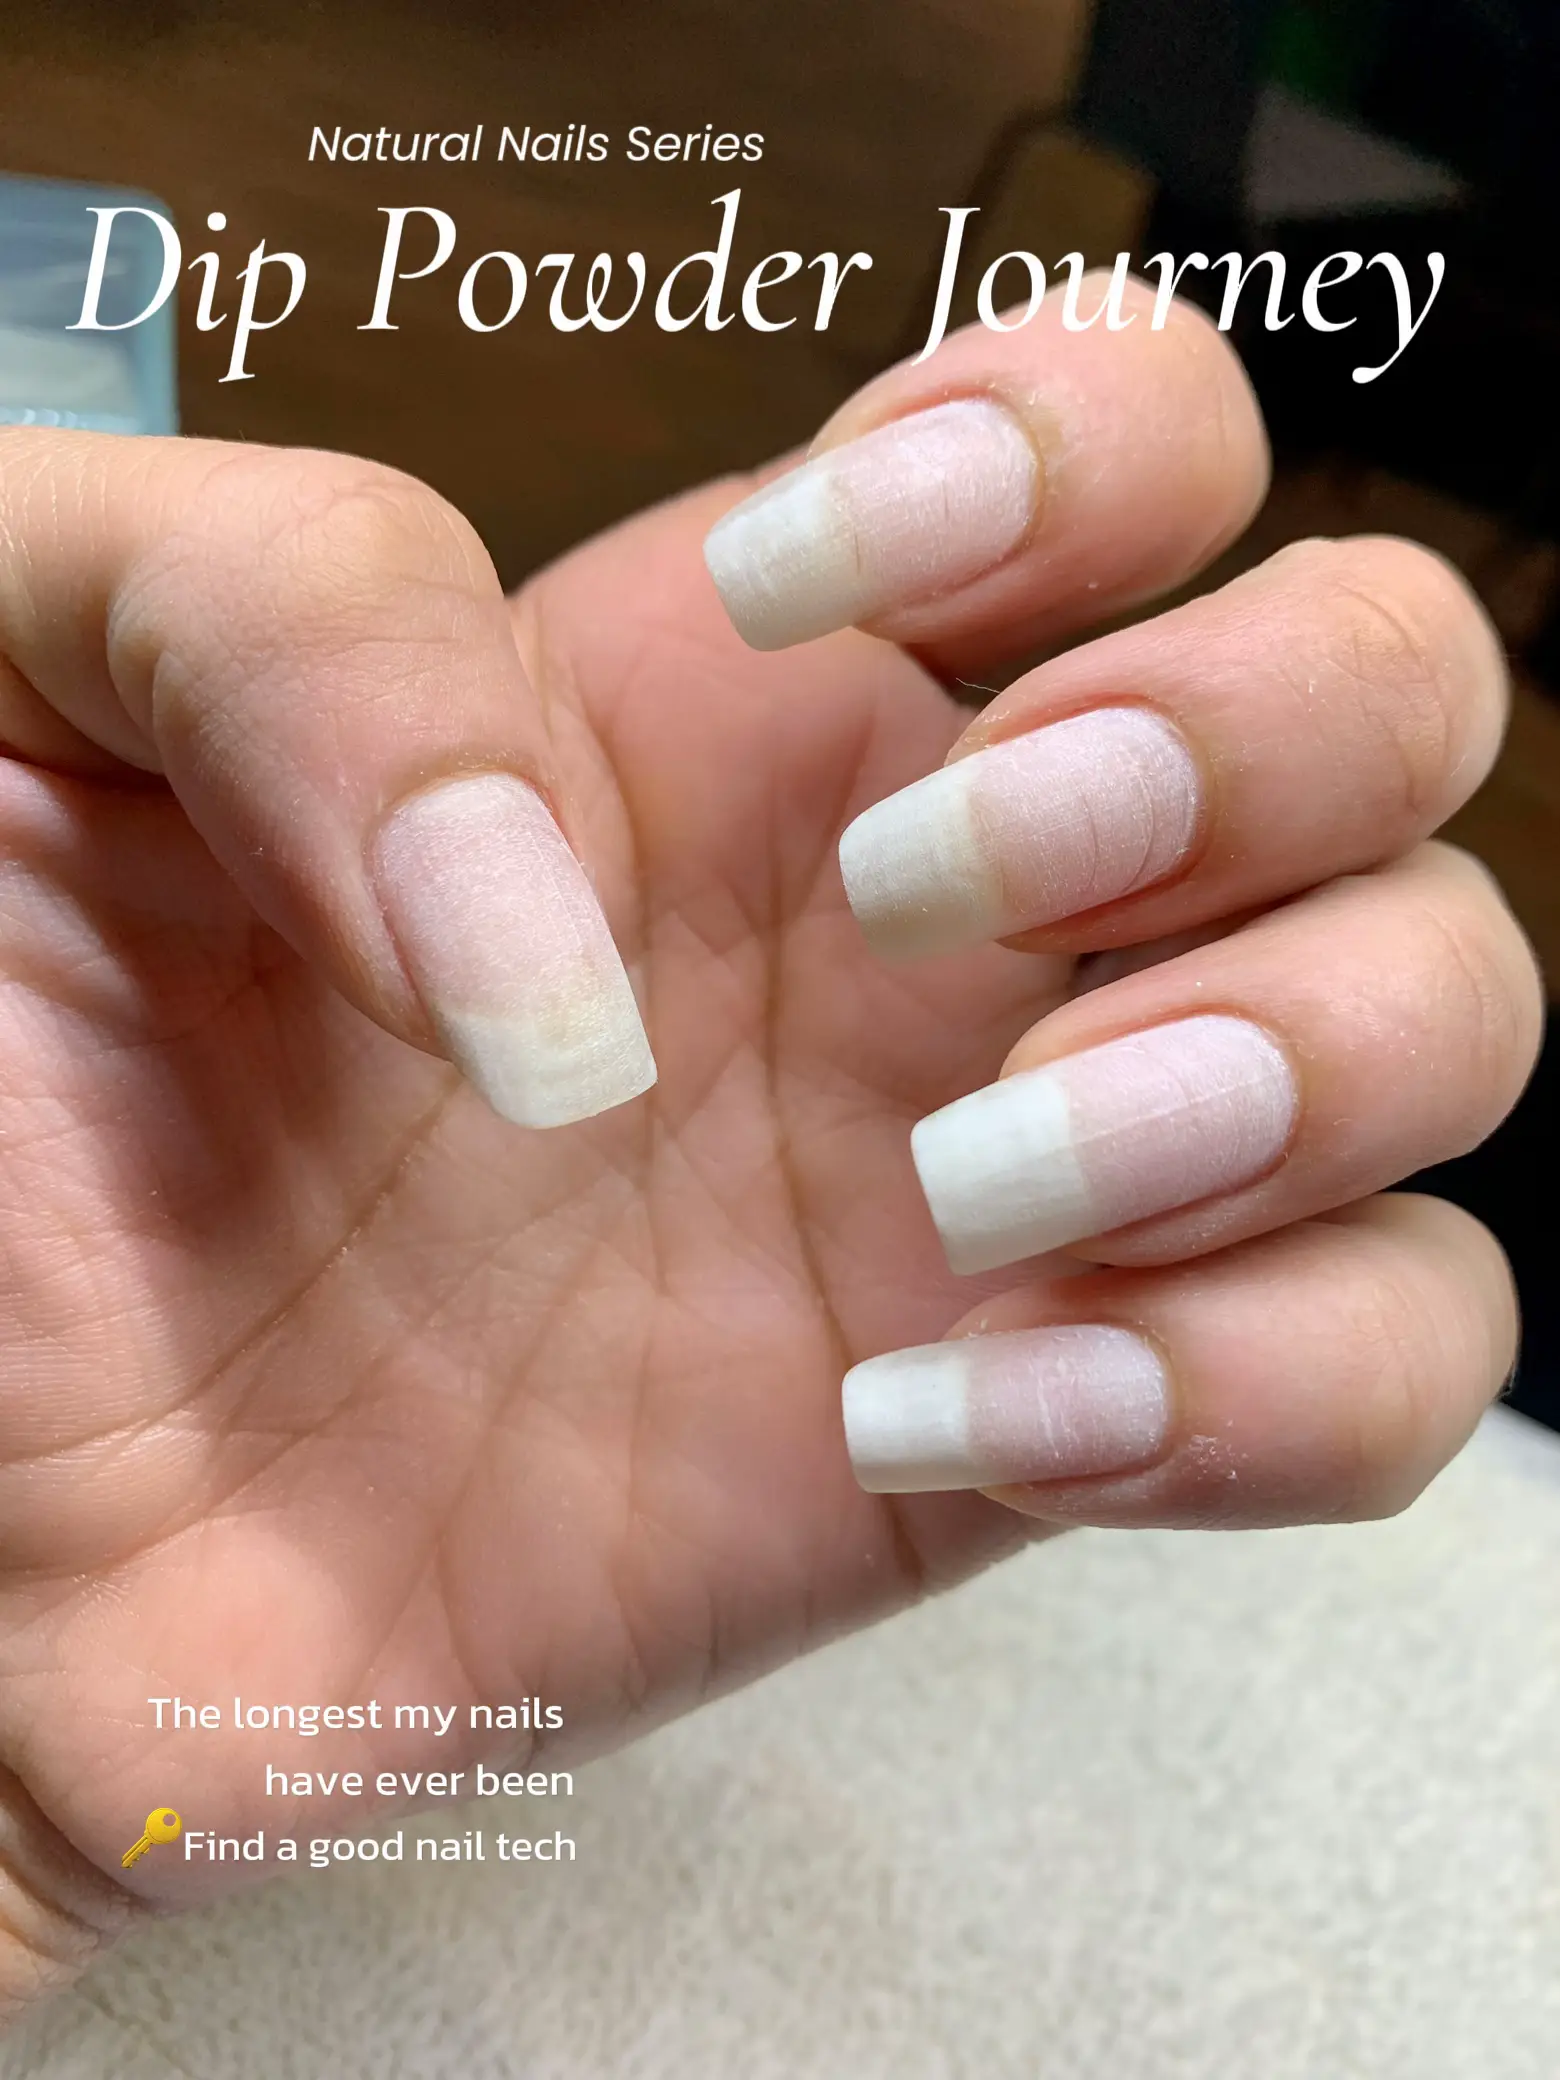 My nails - all OPI dip powder, Gallery posted by Denise Bozek